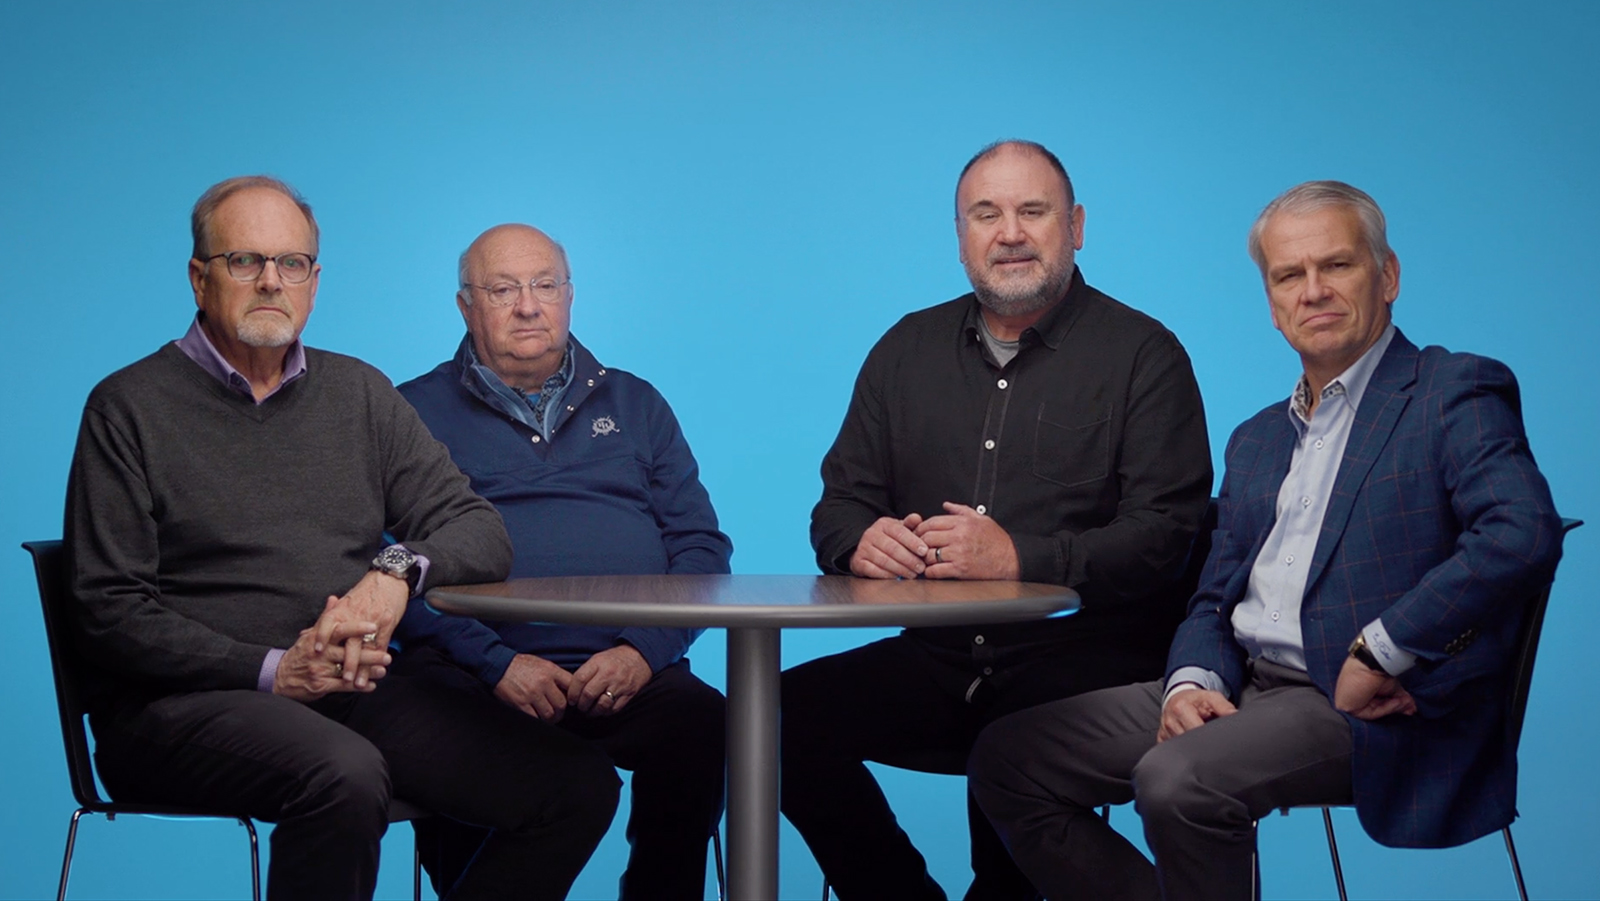 Pastors Mark Hoover, from left, Mike Whitson, Steven Kyle and Benny Tate in a video about their restoration work with Johnny Hunt. Video screen grab